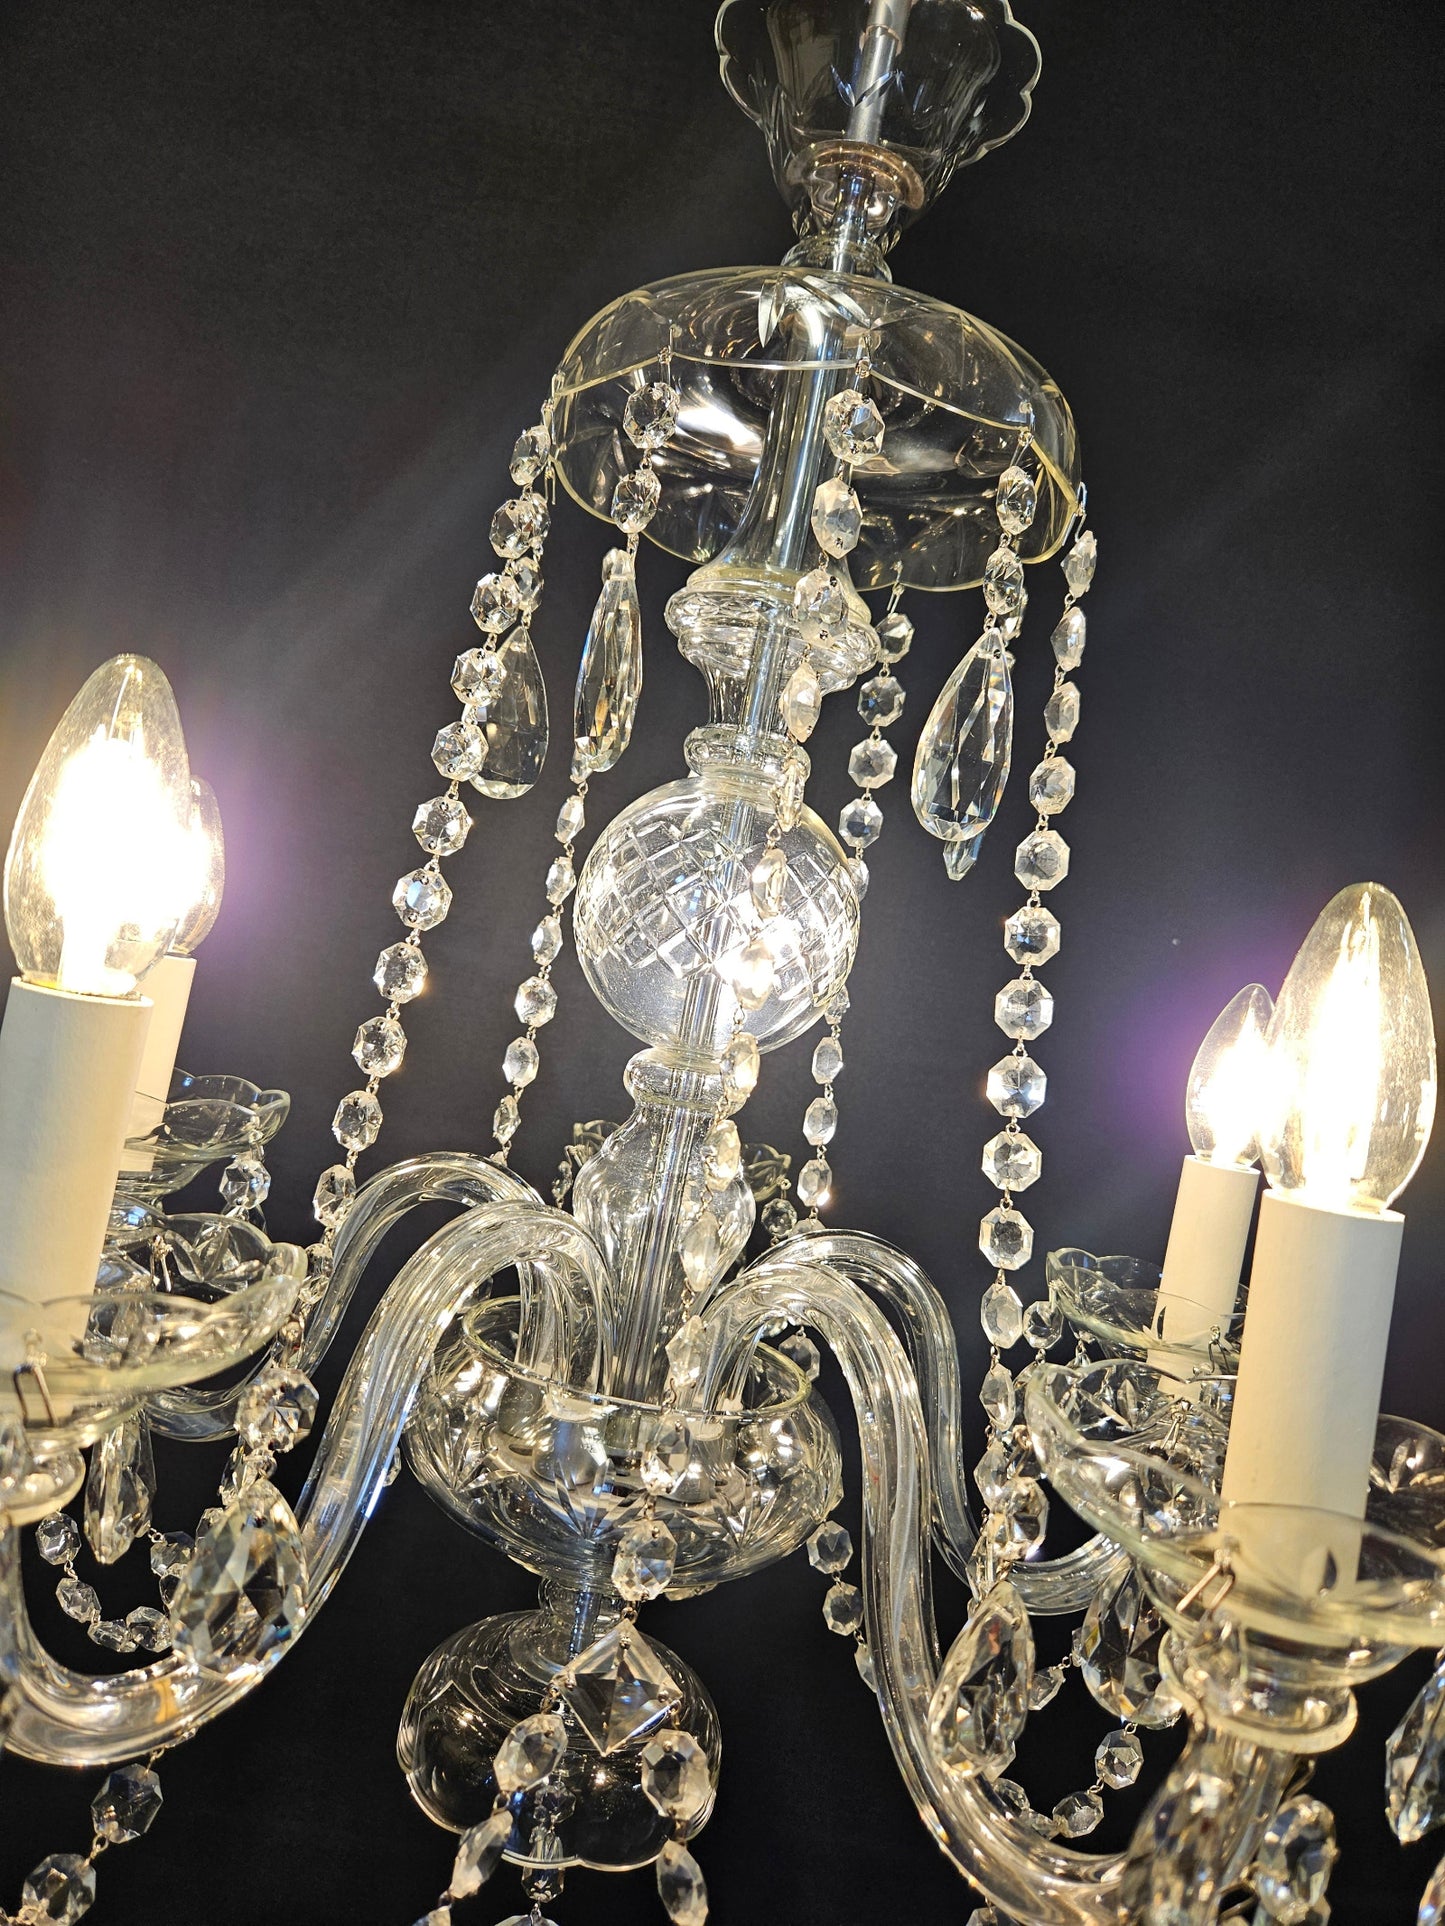 side view with chandelier lit